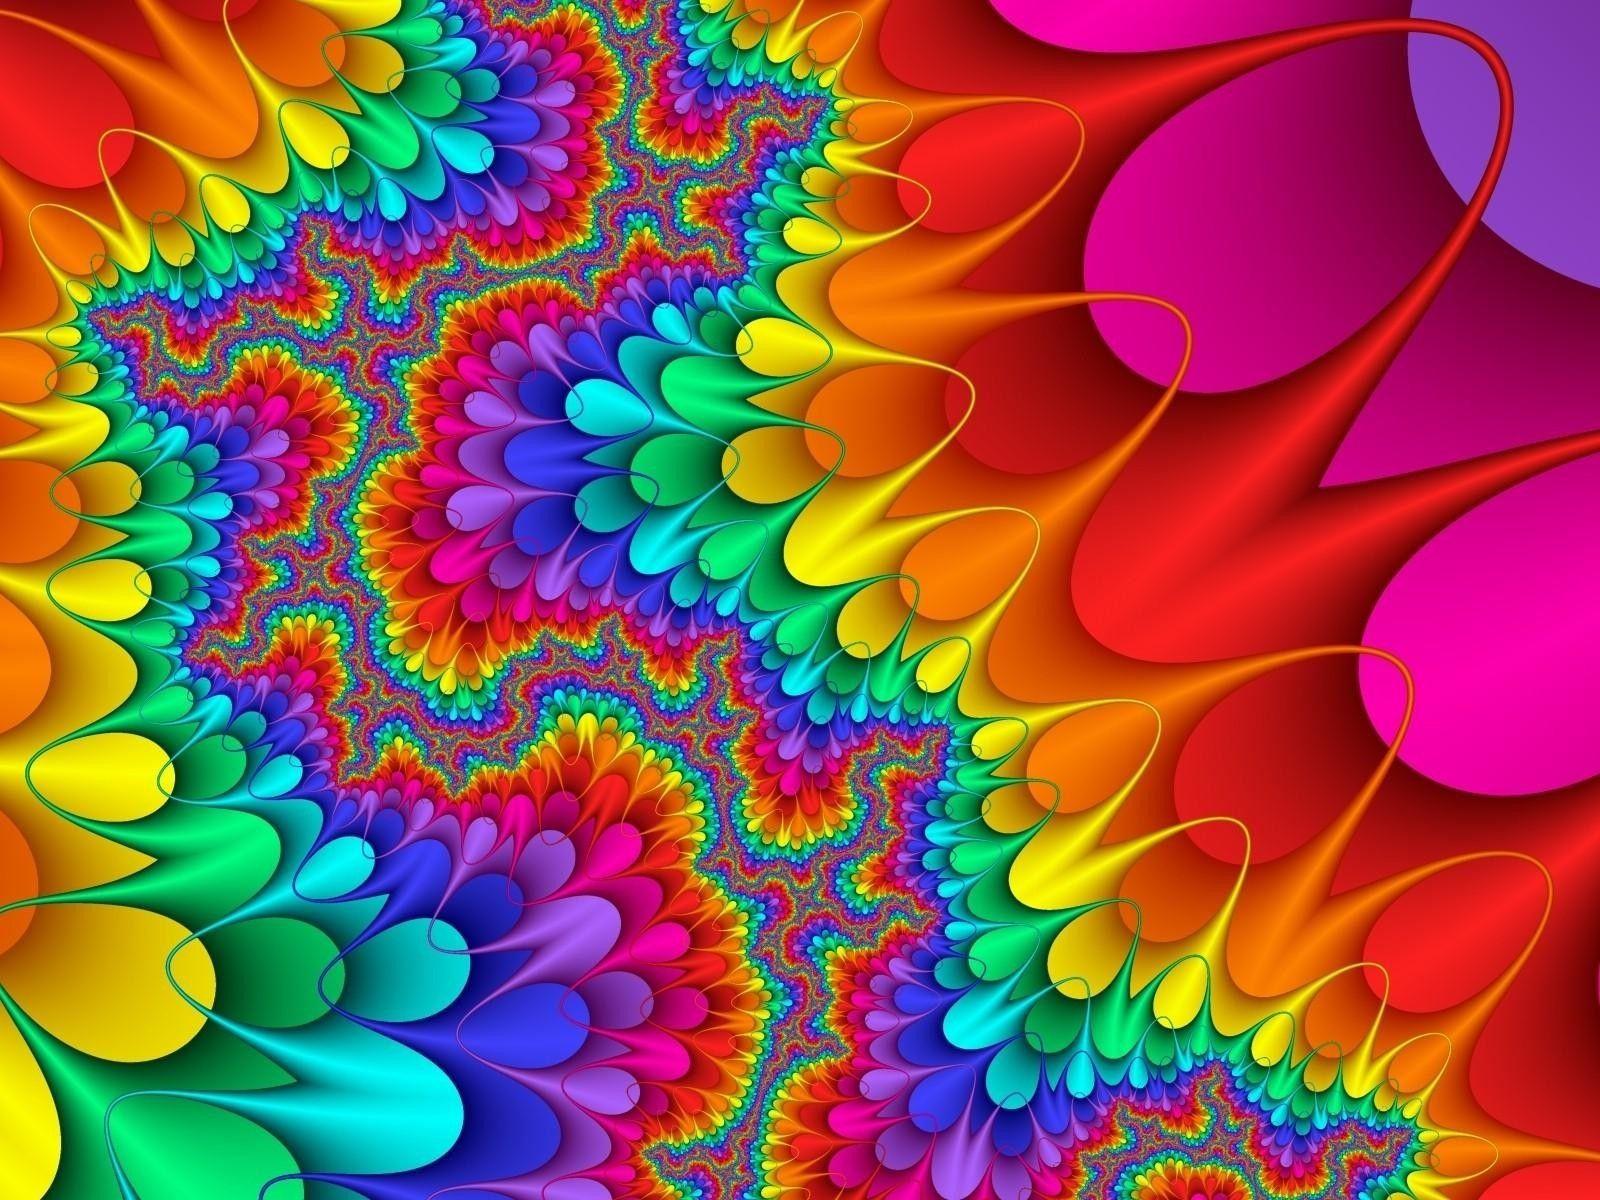 Awesome Colorful Wallpaper Image